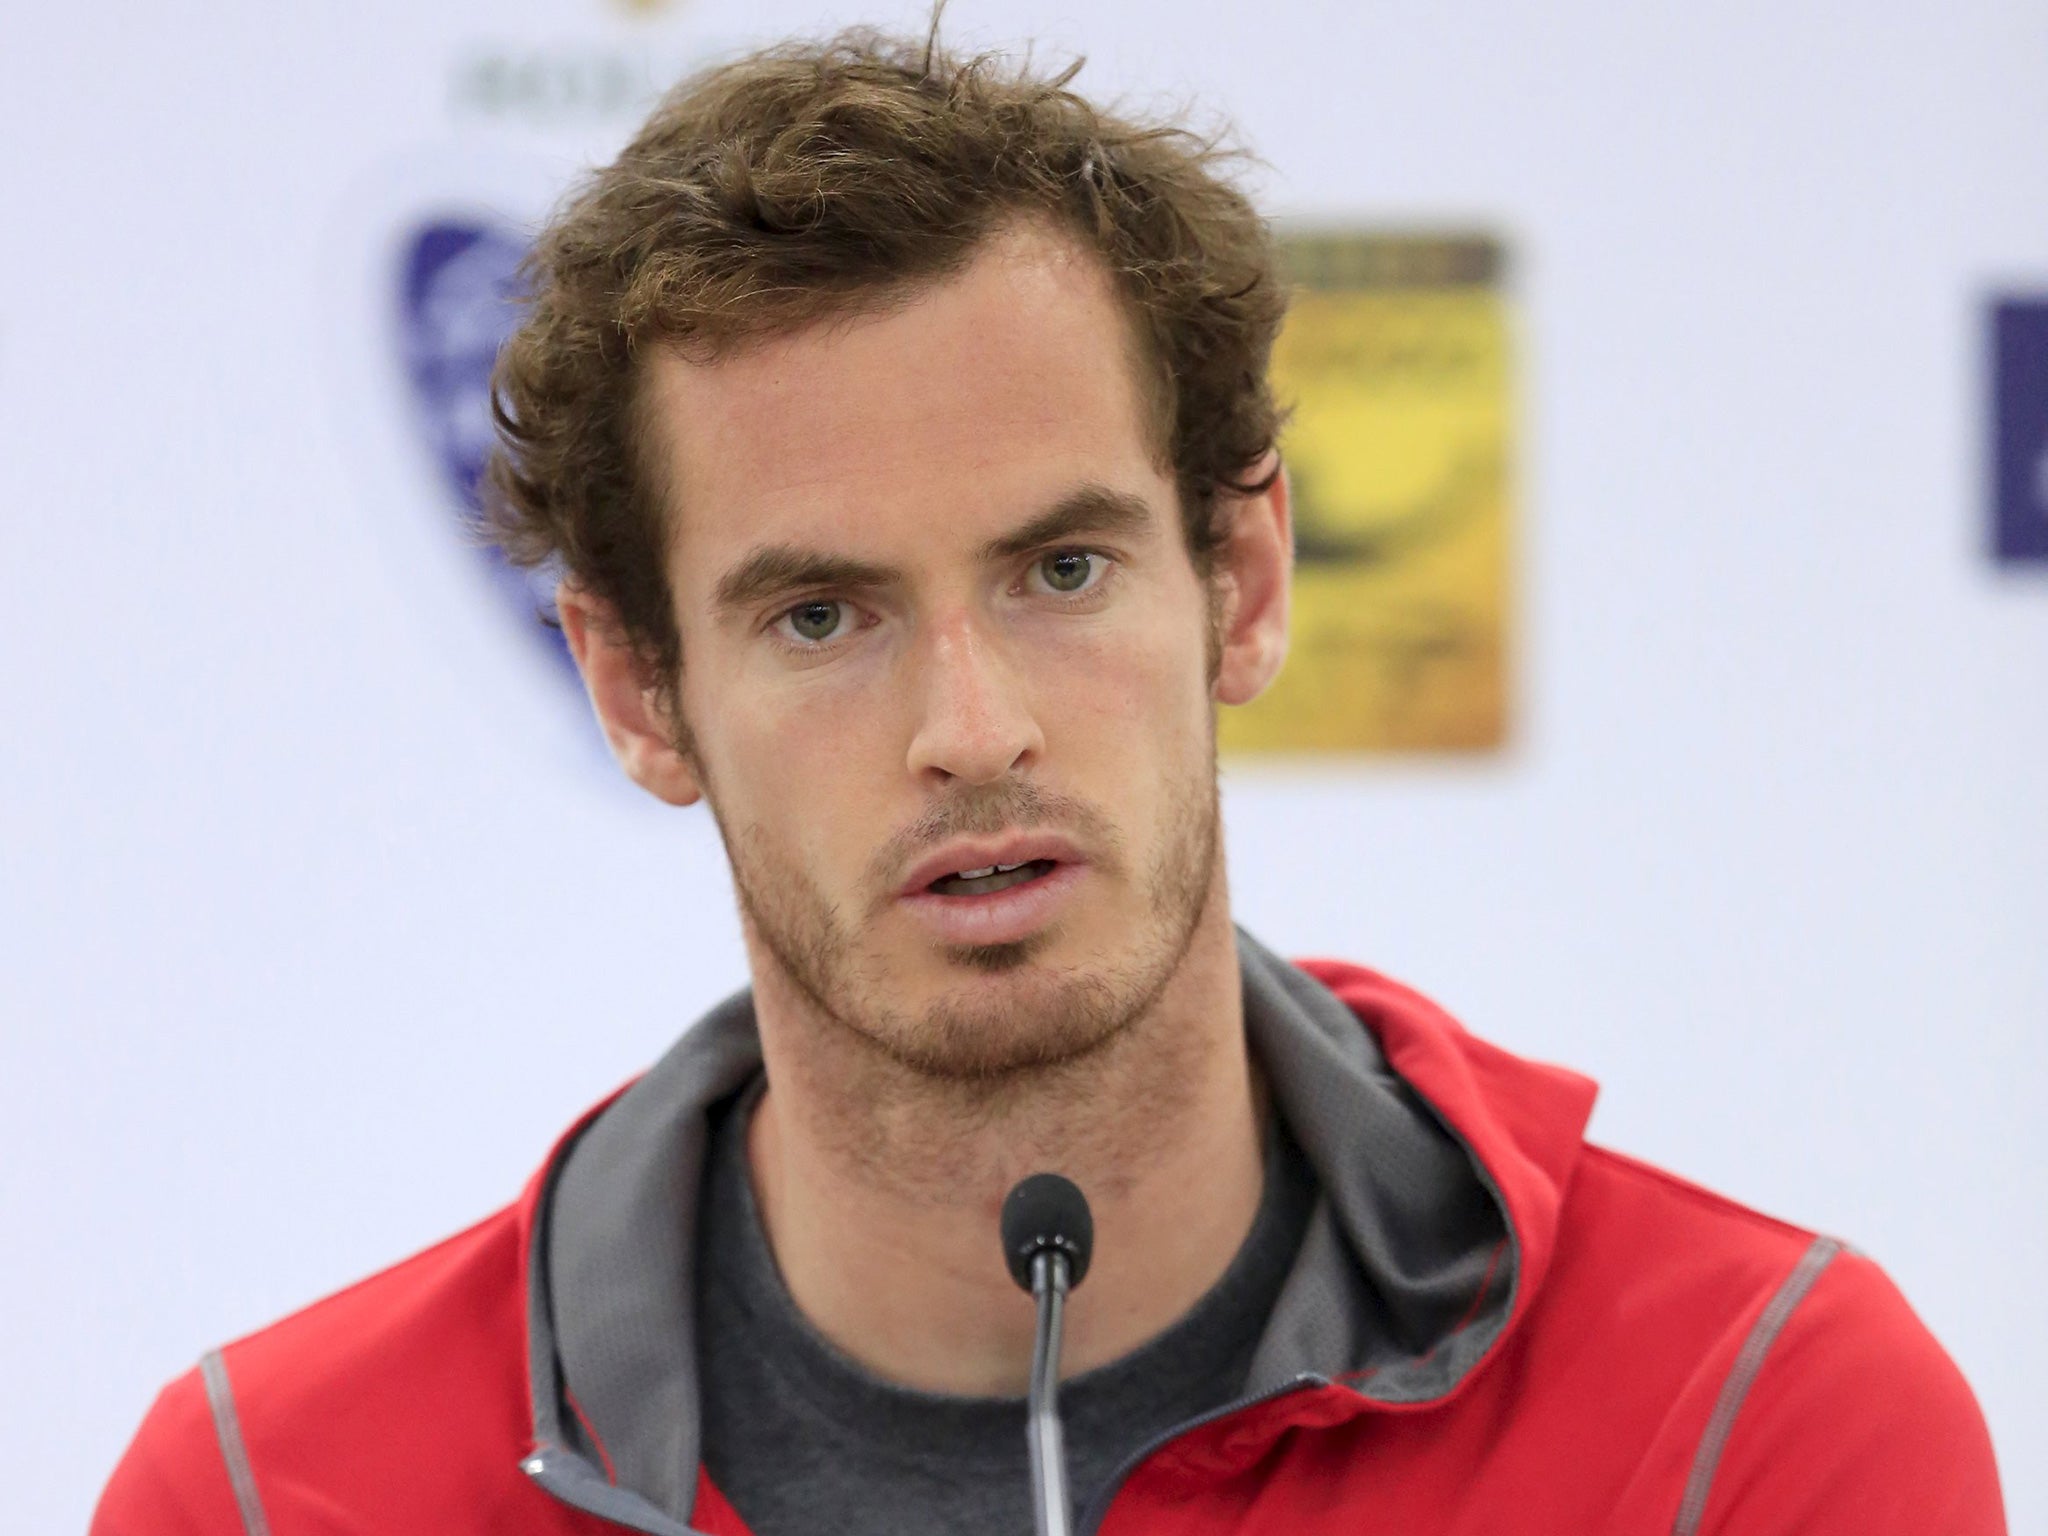 Andy Murray competes in the Shanghai Masters this week